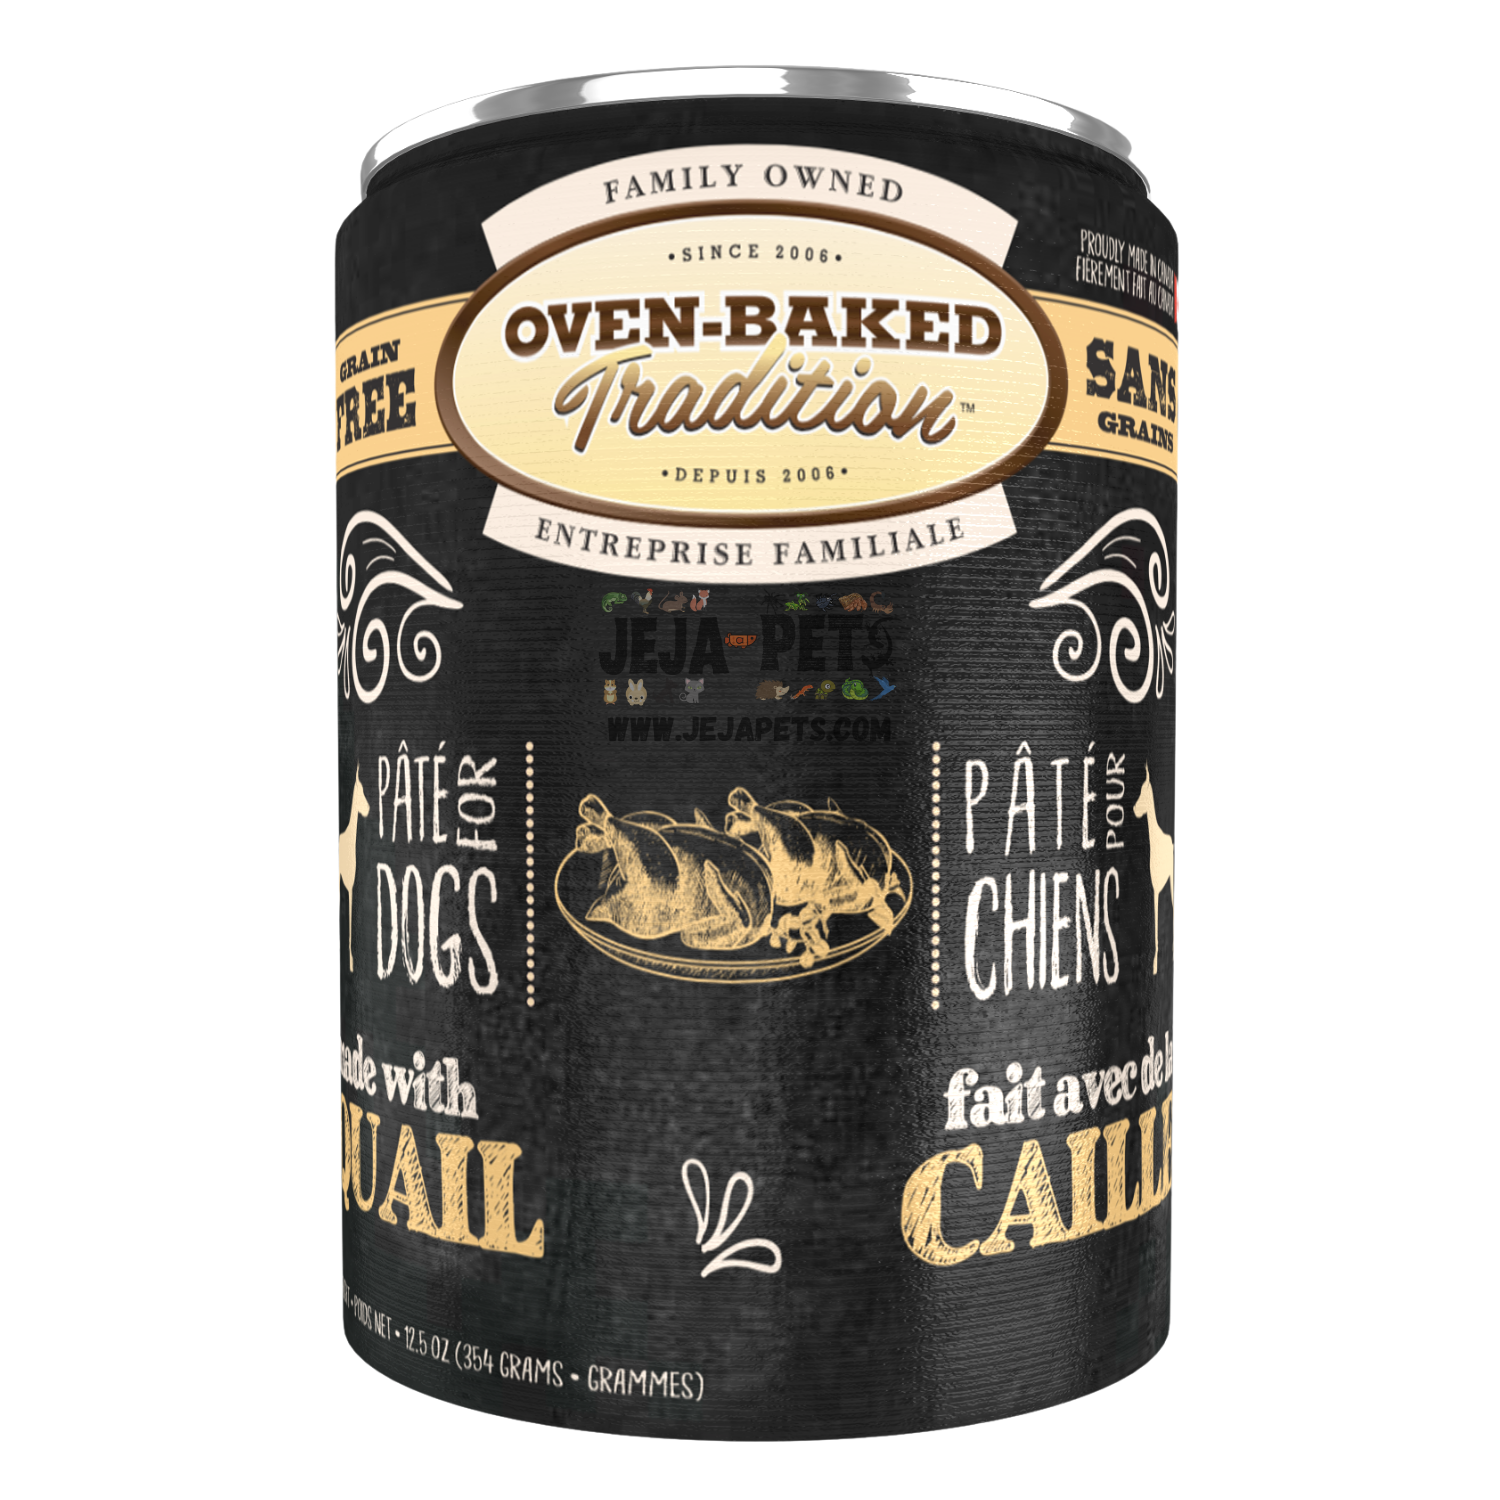 Oven-Baked Tradition (Quail) PÂTÉ Canned Food for Dogs - 354g